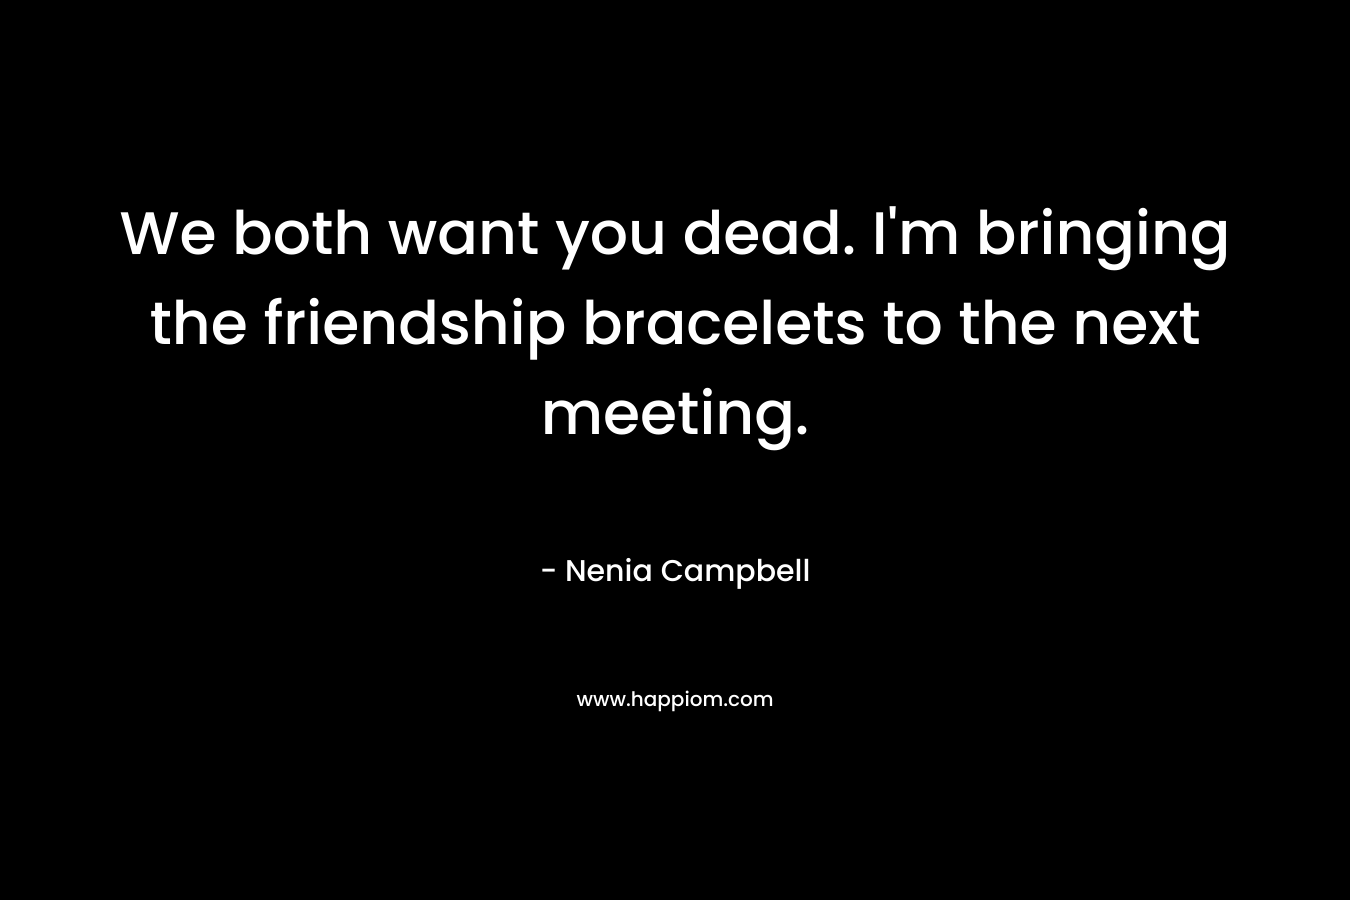 We both want you dead. I’m bringing the friendship bracelets to the next meeting. – Nenia Campbell